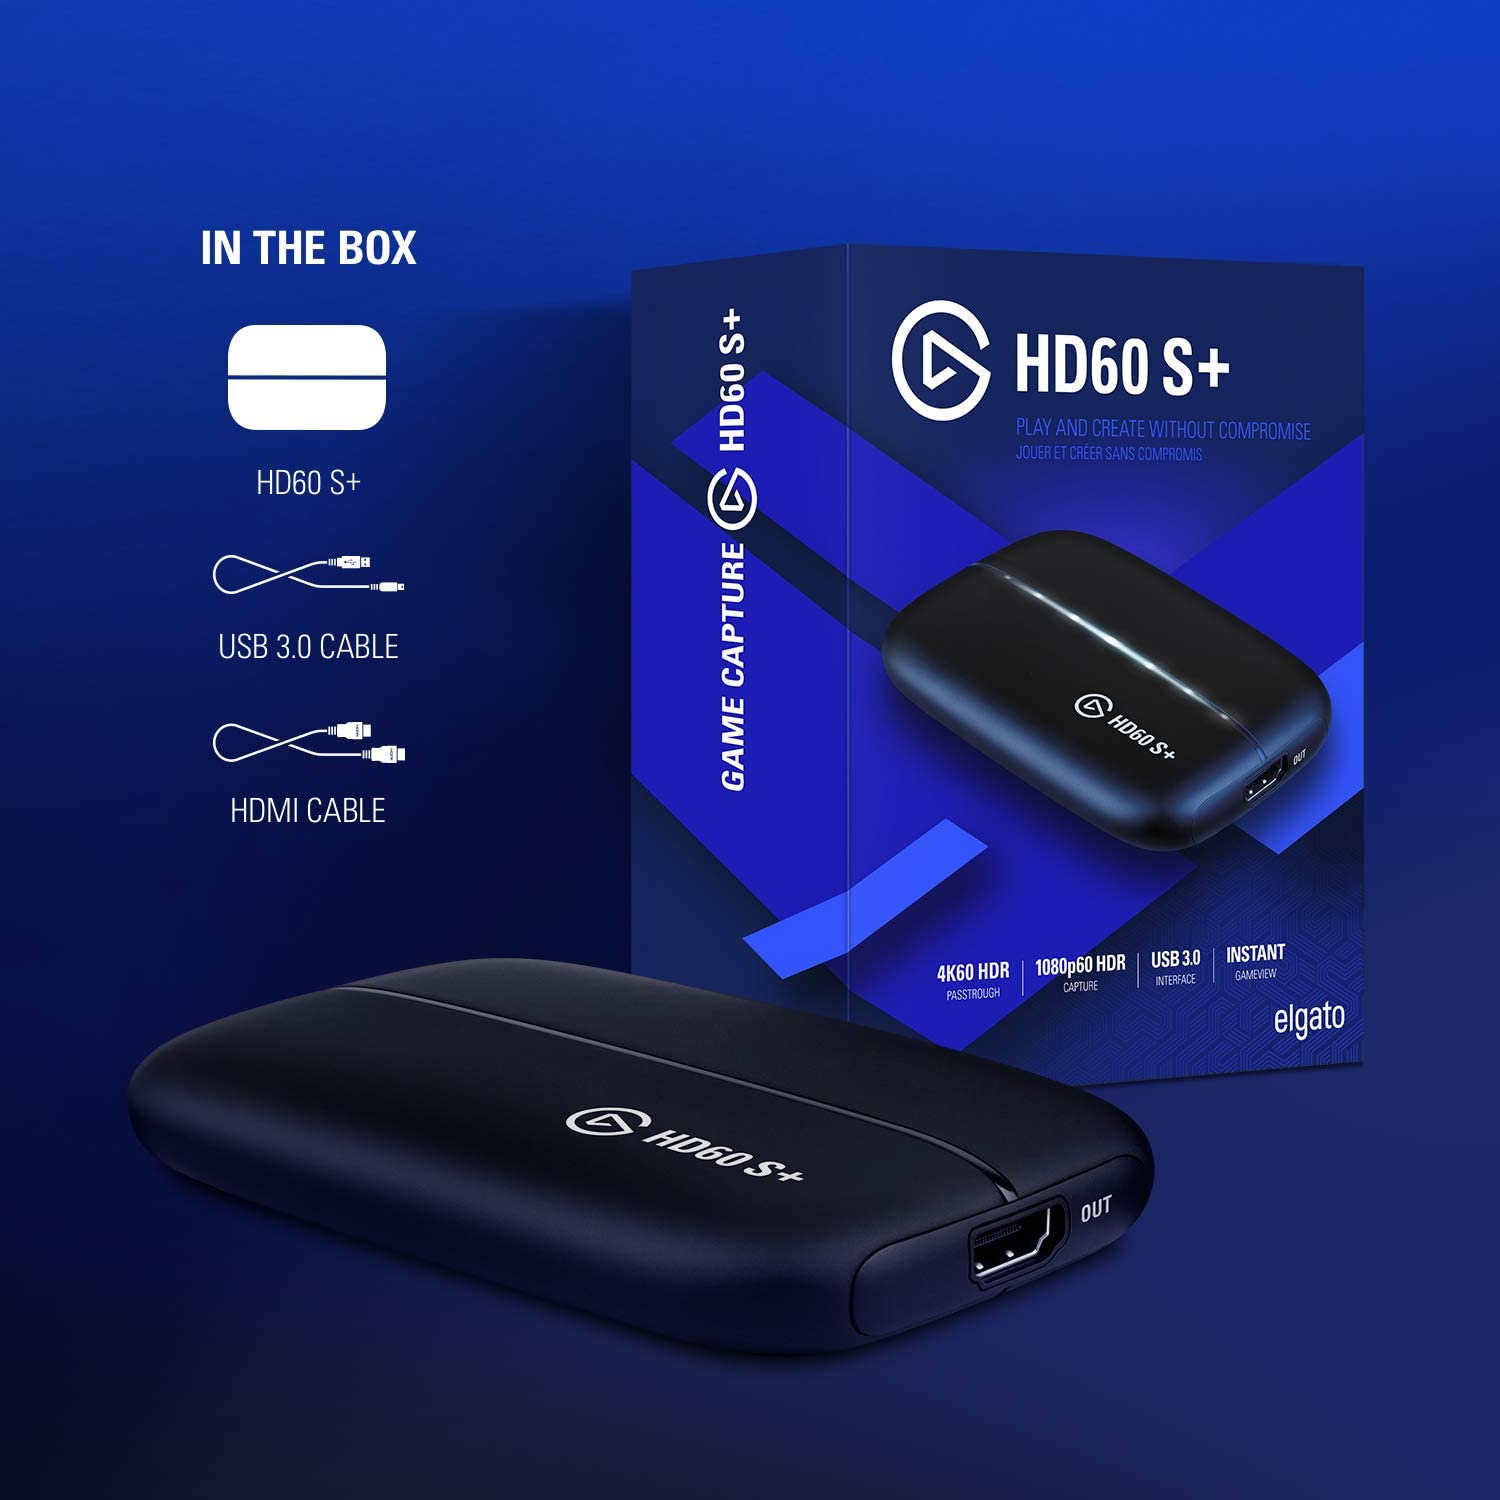 Elgato HD60 S+ Capture Card for PS5, PS4, Xbox Series X/S, USB 3.0